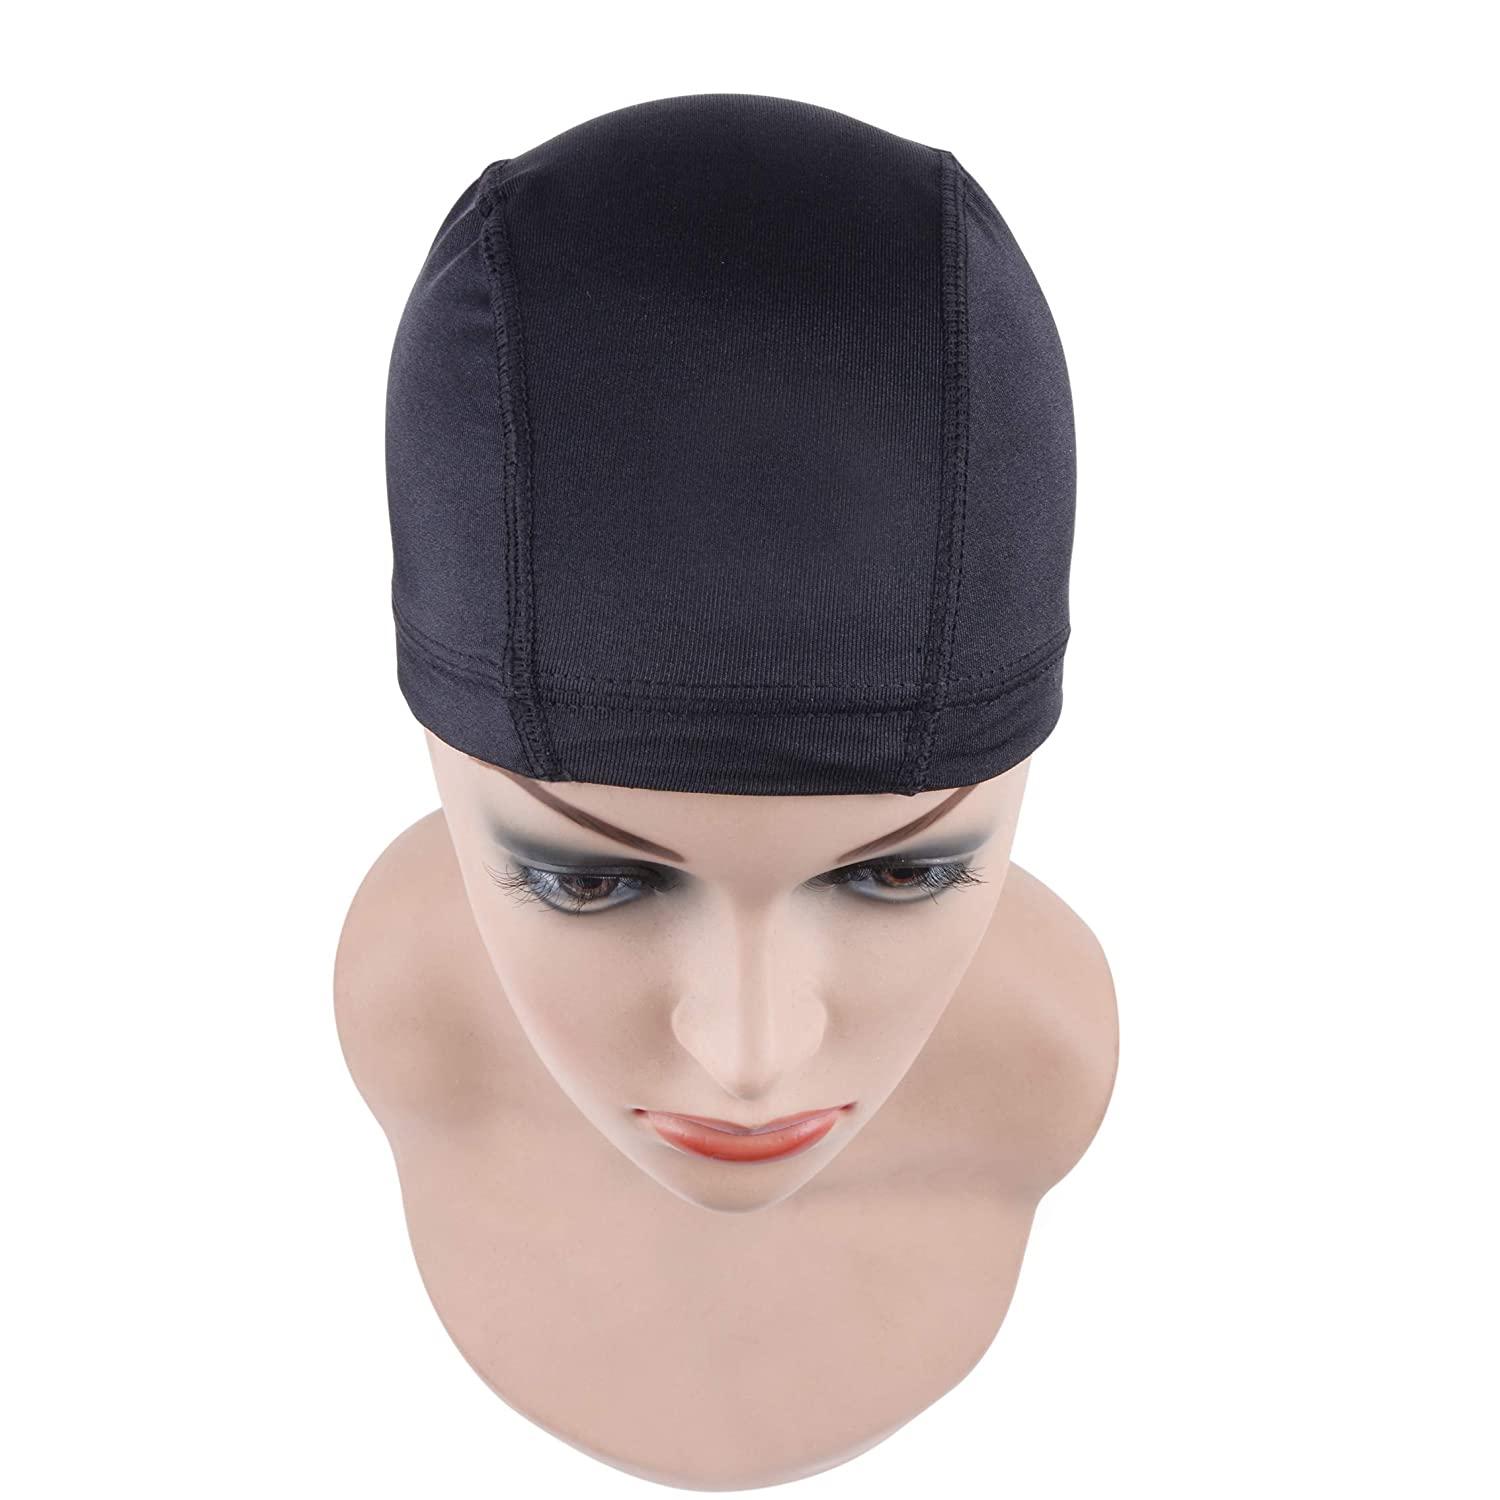 YANTAISIYU 2 Pcs/Lot Black Dome Cap Wig Cap for Making Wigs Stretchable Hairnets with Wide Elastic Band (Dome Cap L)